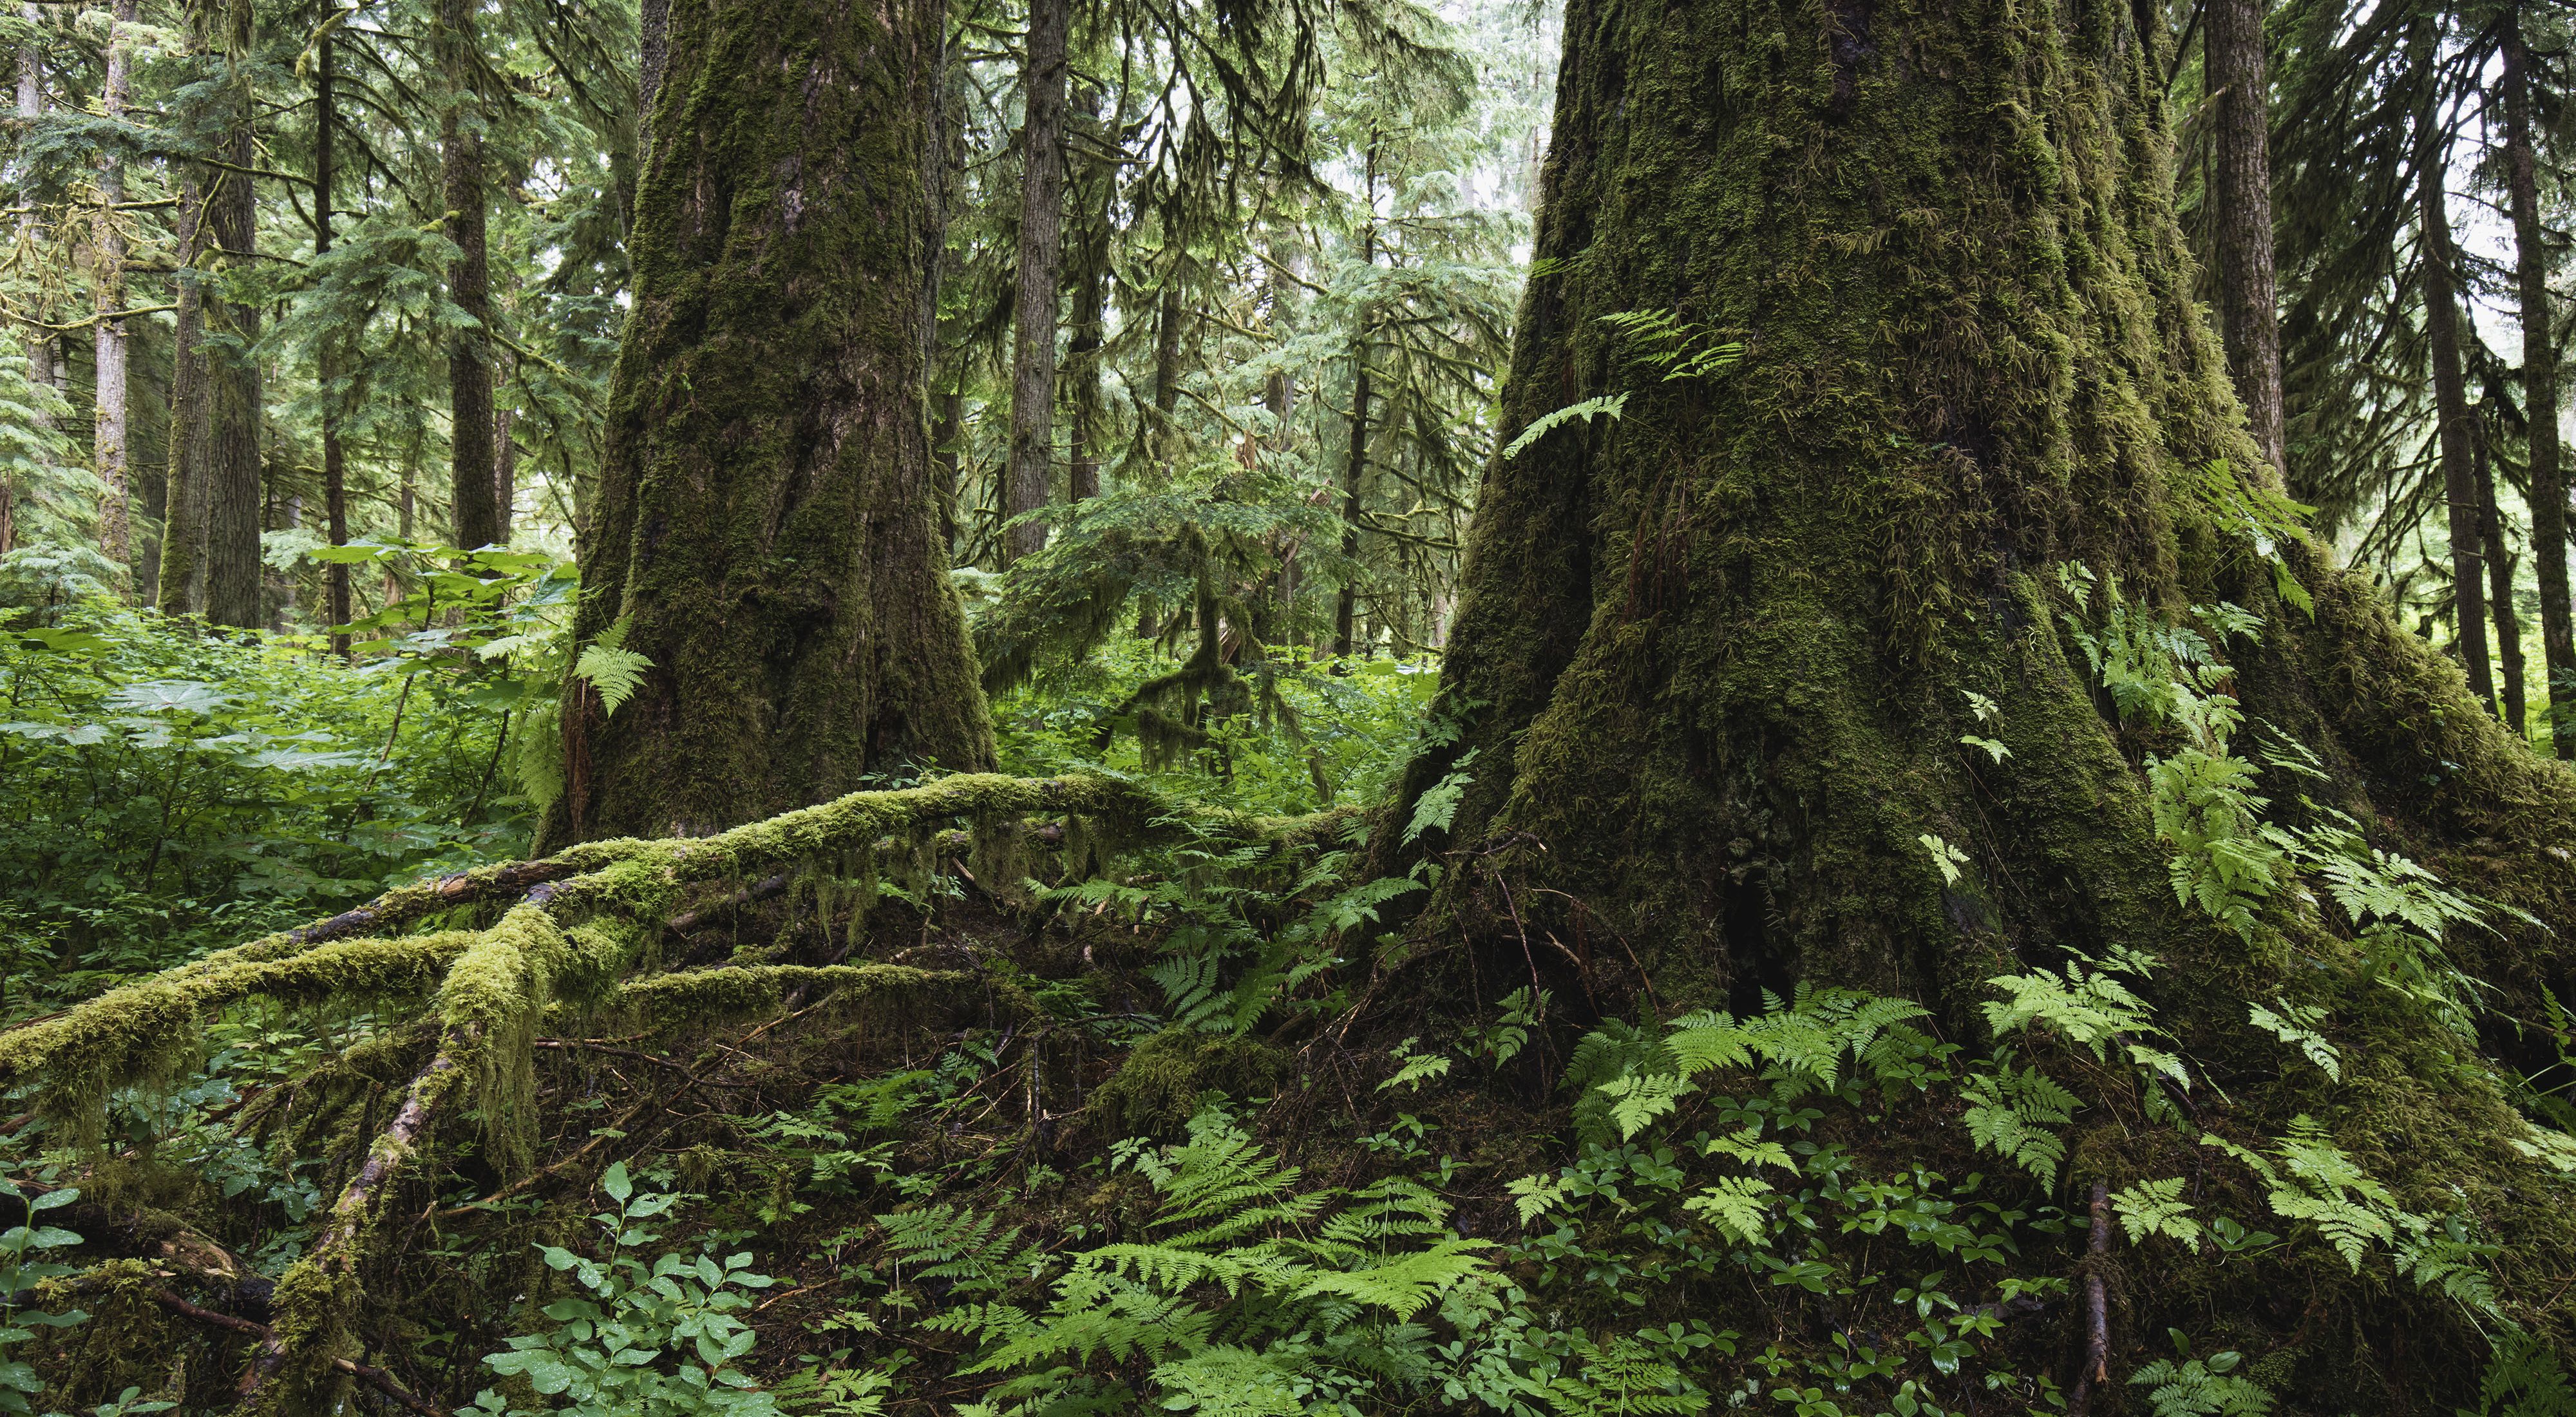 Close up of giant, old-growth trees covered in moss in the Tongass National Forest in Alaska.